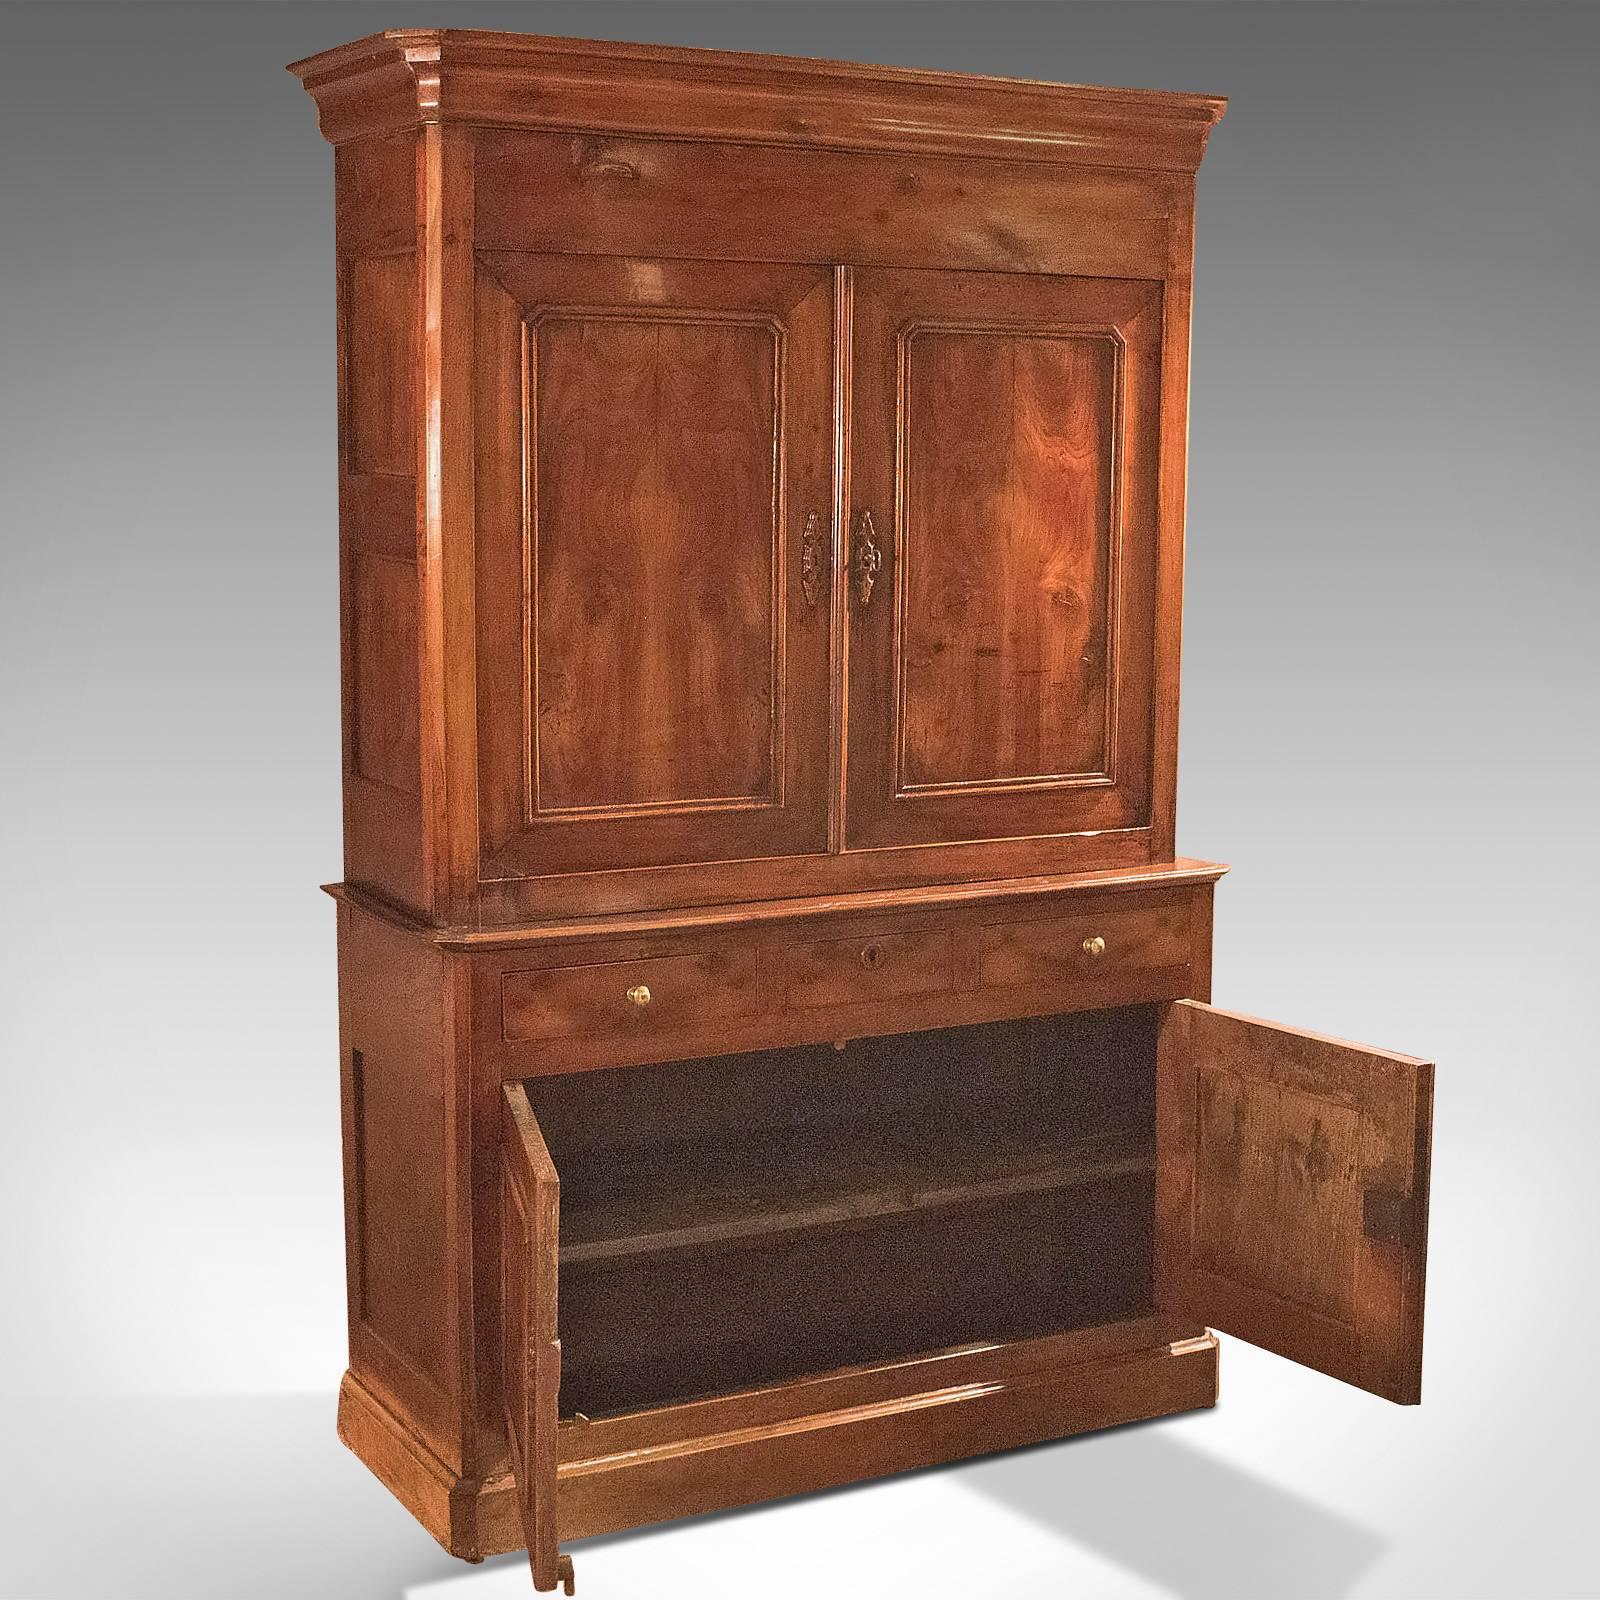 French Provincial Antique House Keepers Cupboard, French Buffet A Deux Corps, Yew Wood c.1780